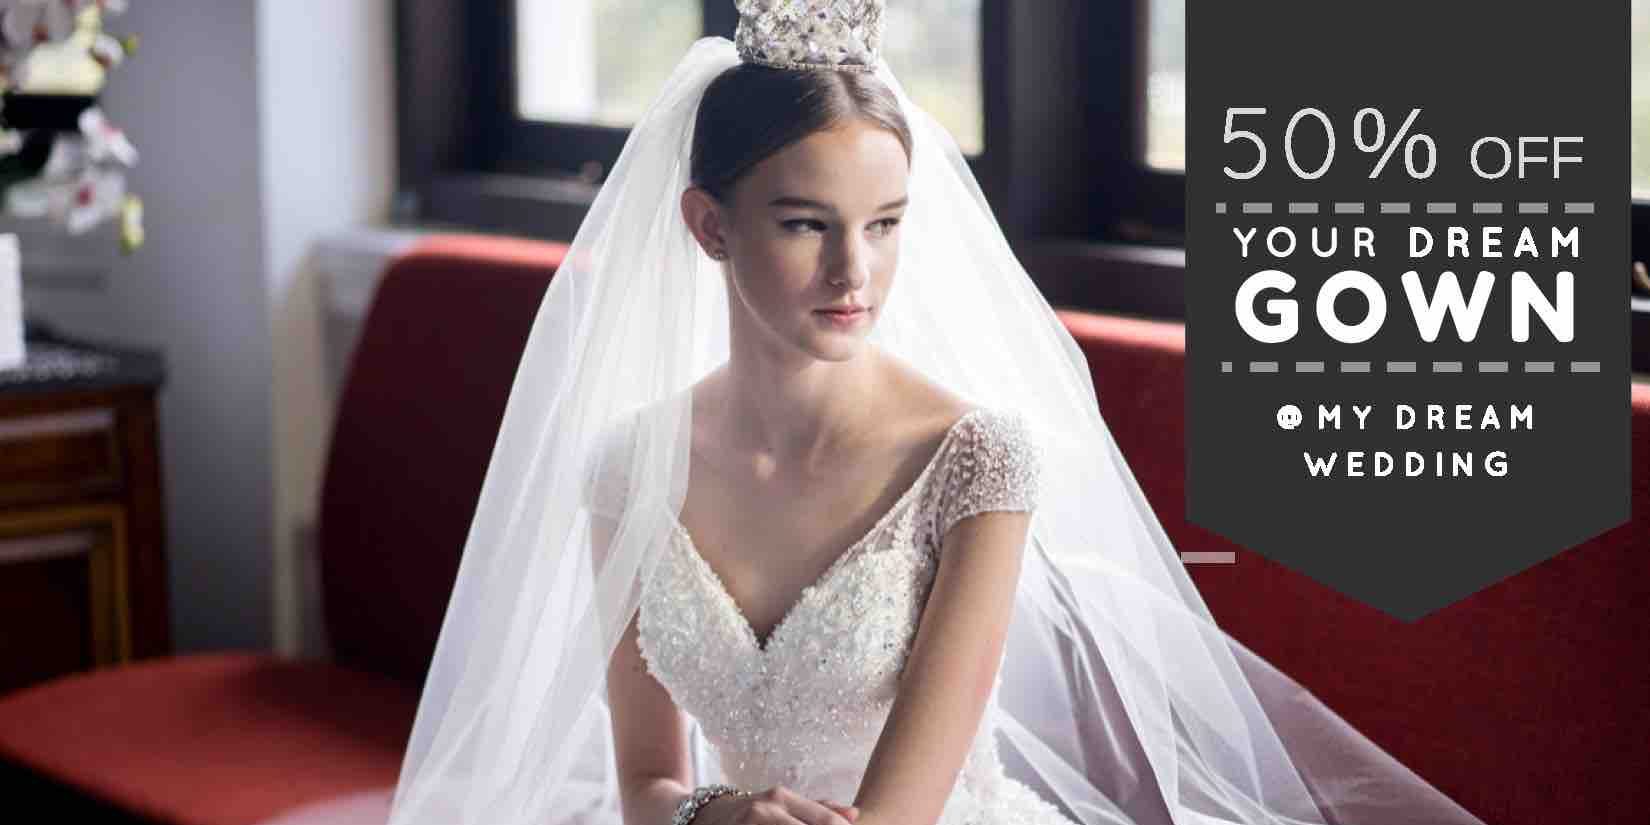 My Dream Wedding Singapore 50% Off Your Dream Gown Promotion 27-28 May 2017